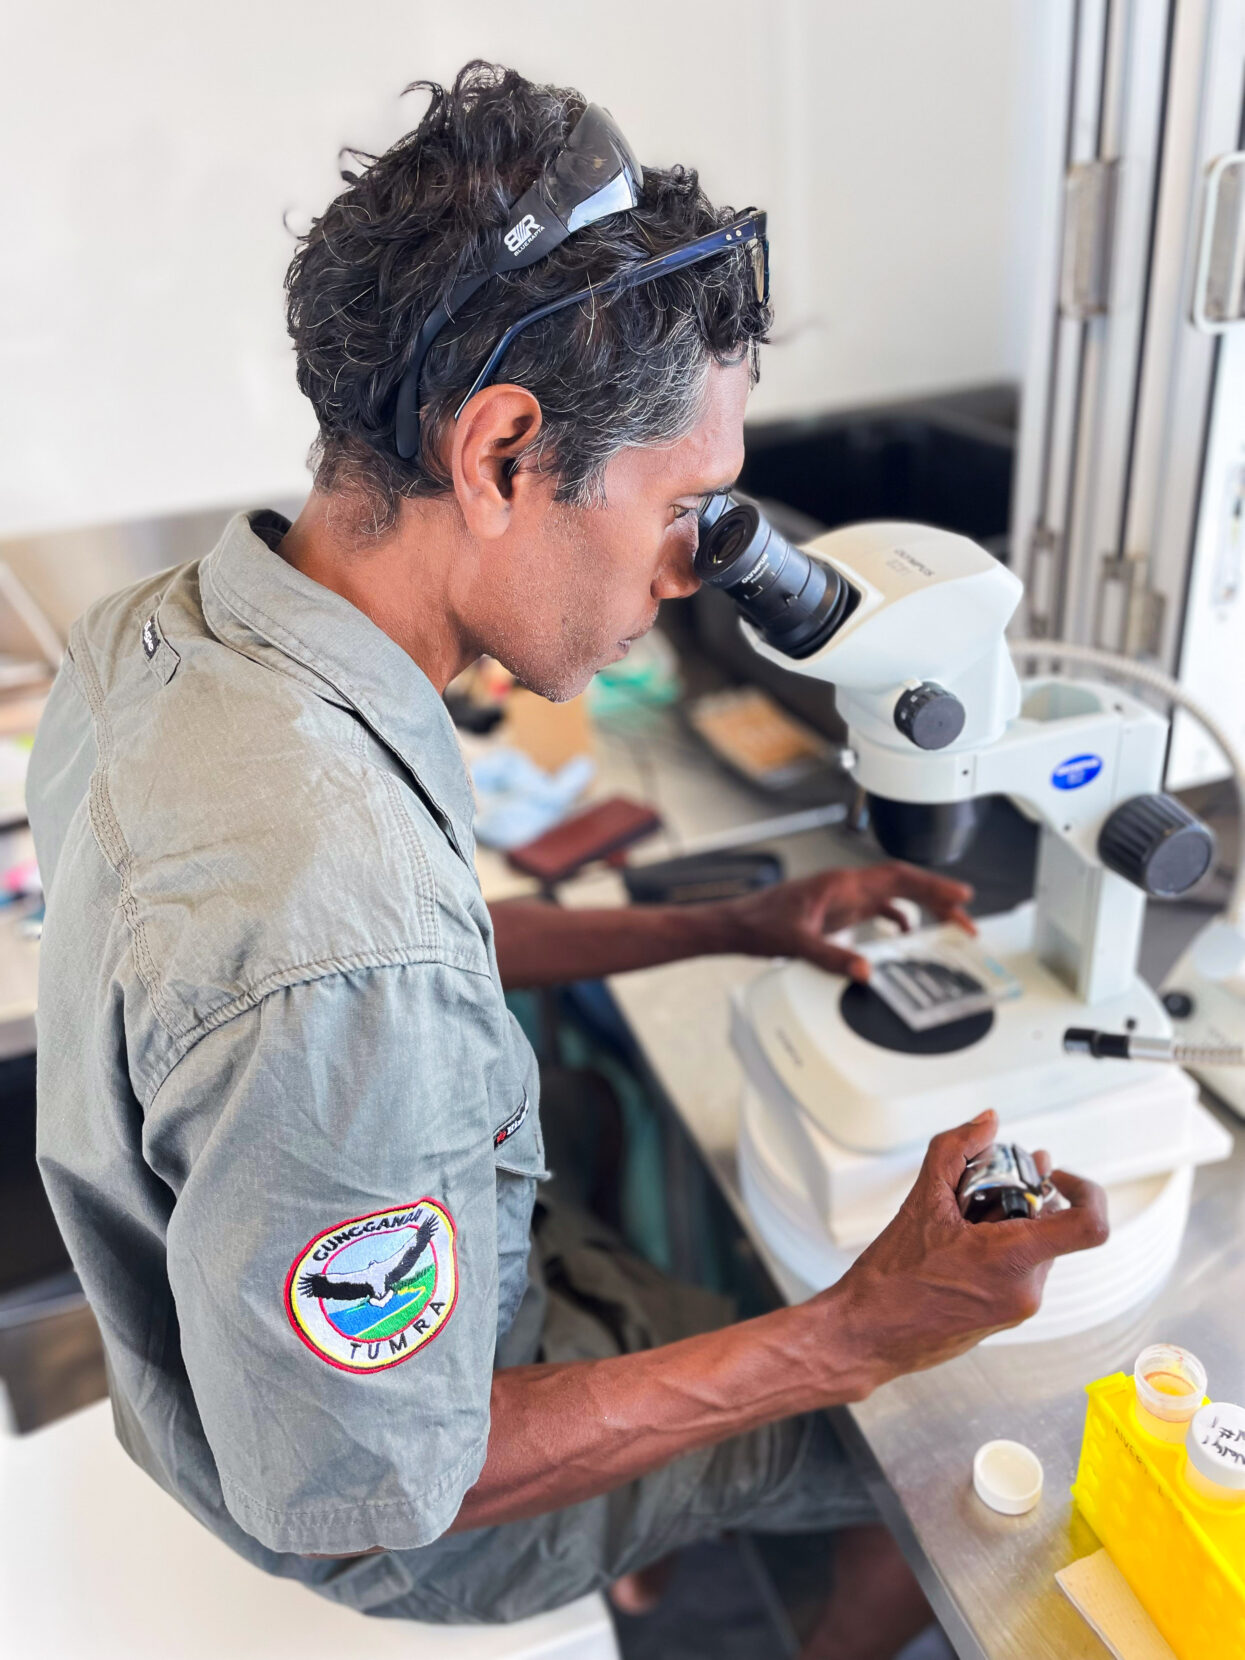 An Indigenous Australian man peers through a microscope. His jacket bears a patch that reads 